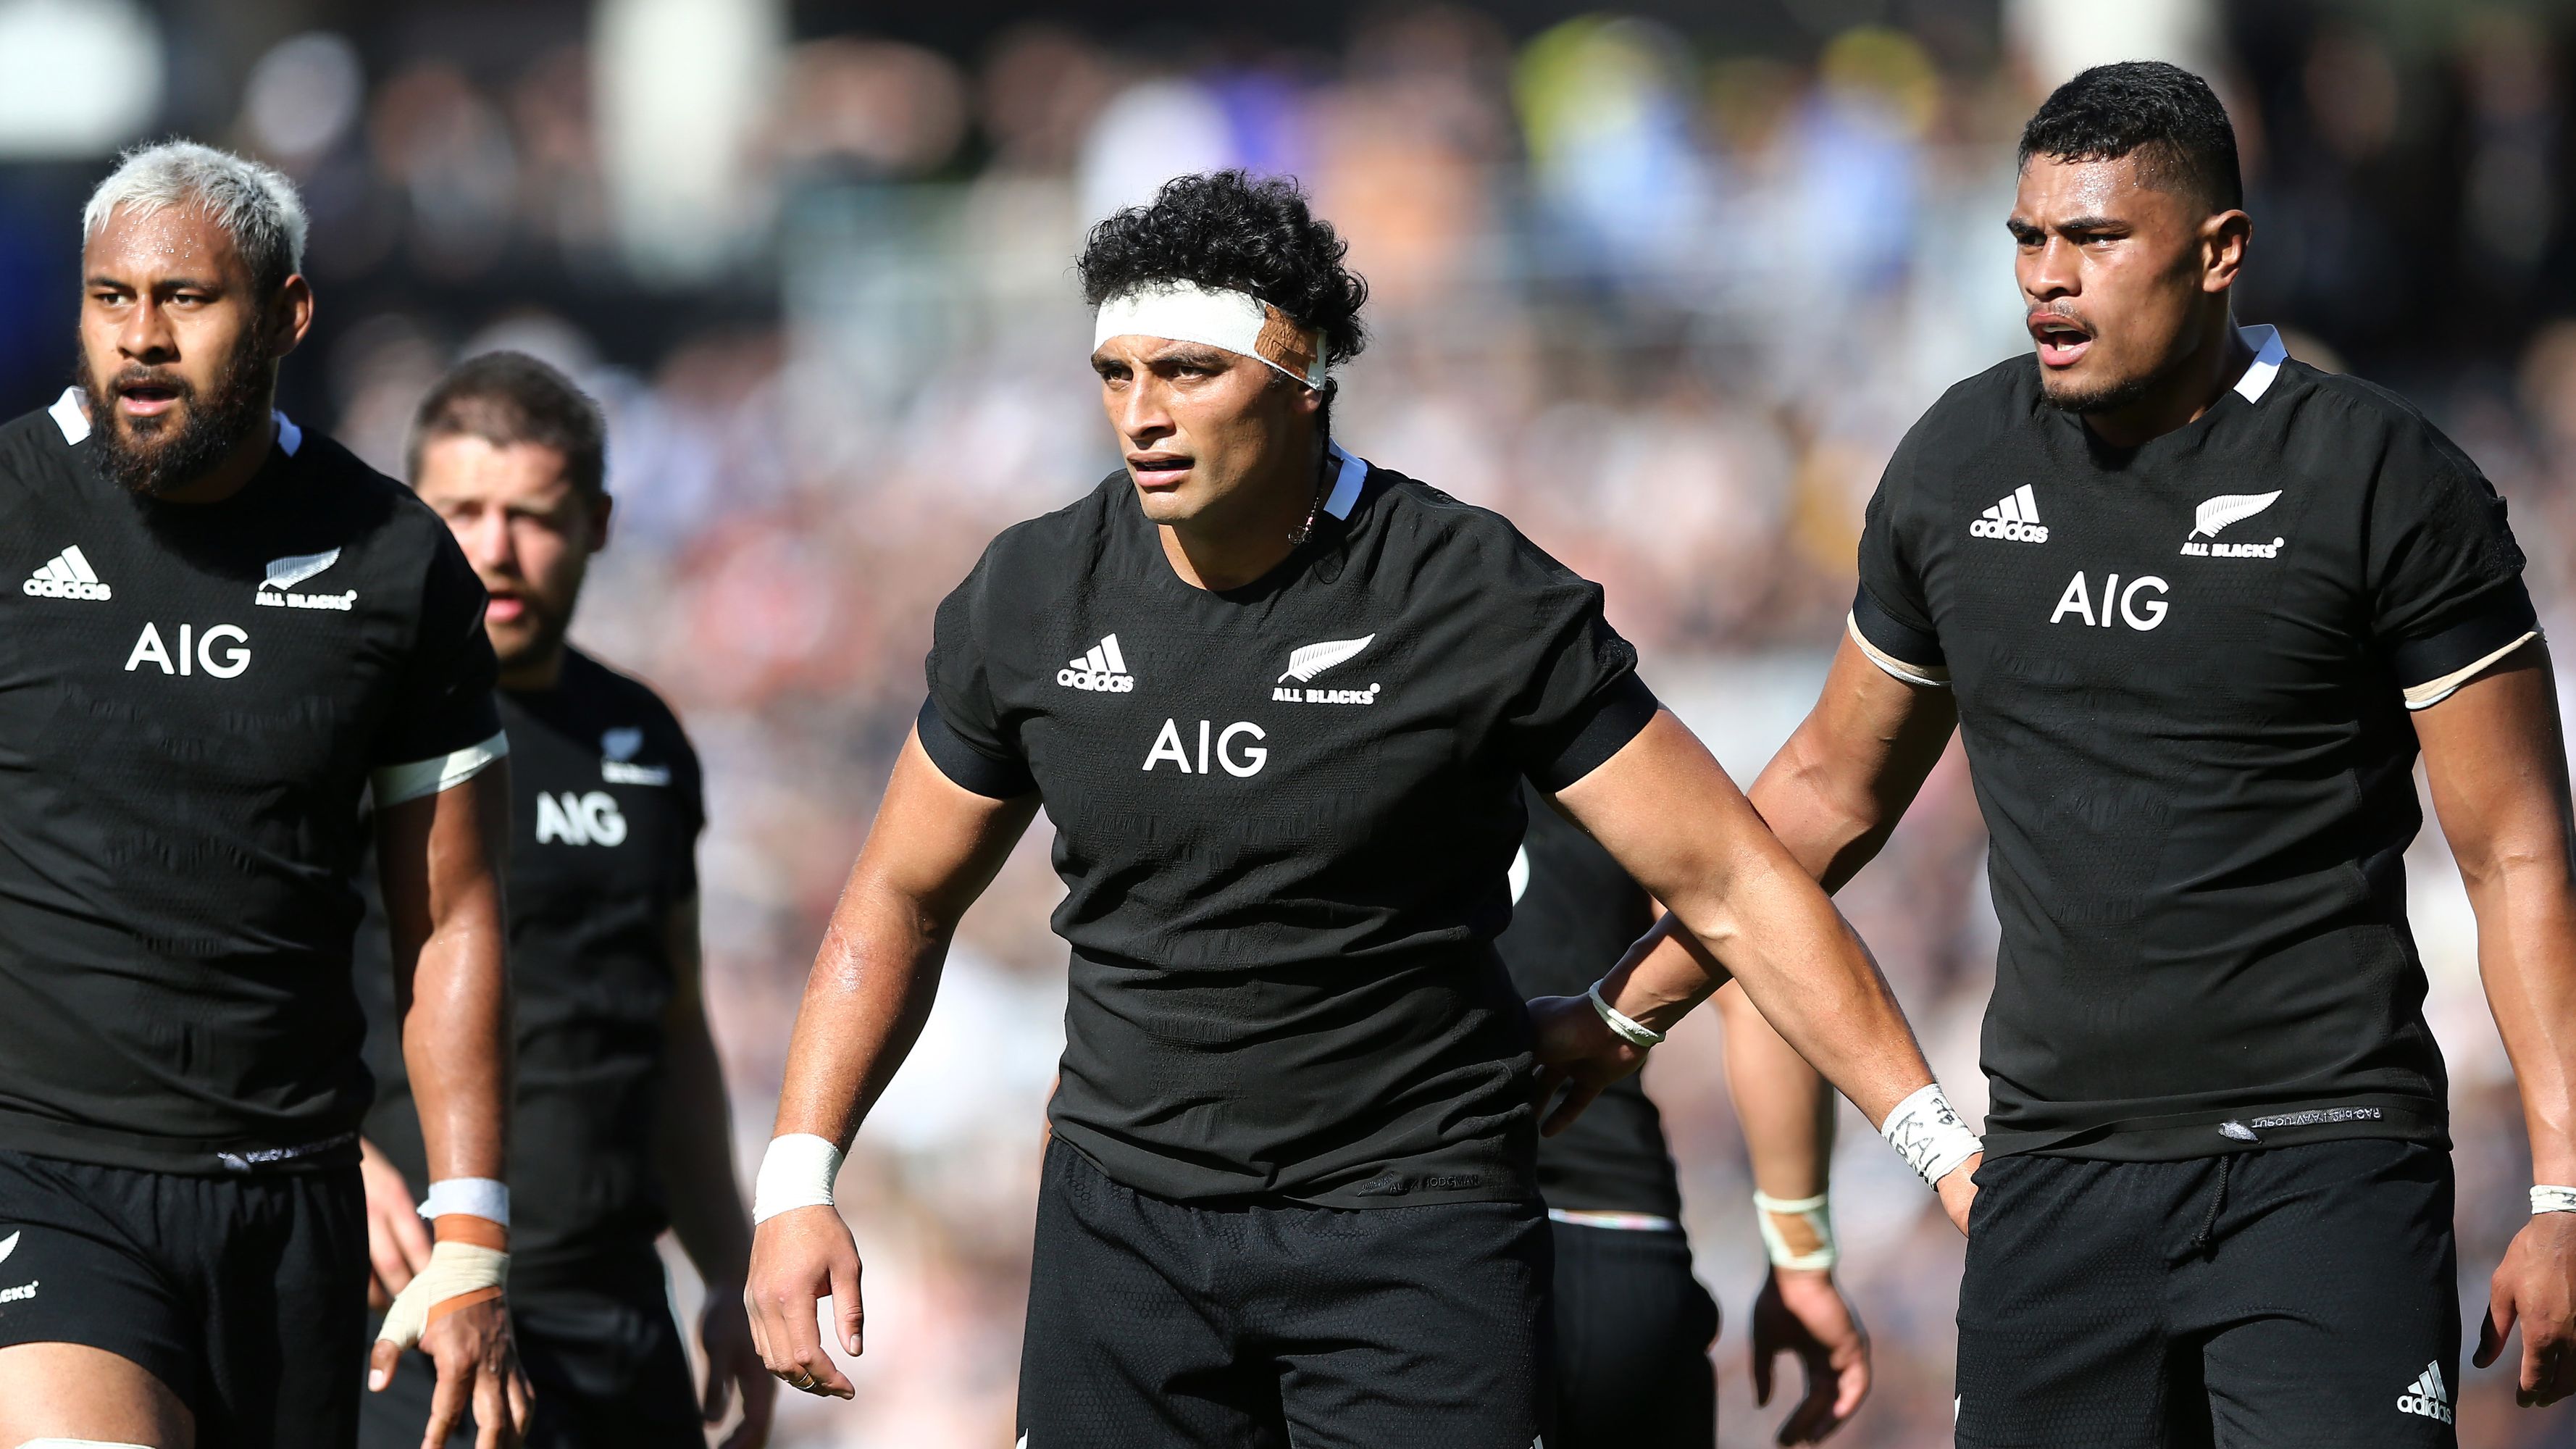 Alex Hodgman (centre) of the All Blacks looks on during the Bledisloe Cup match against the Wallabies in 2020.